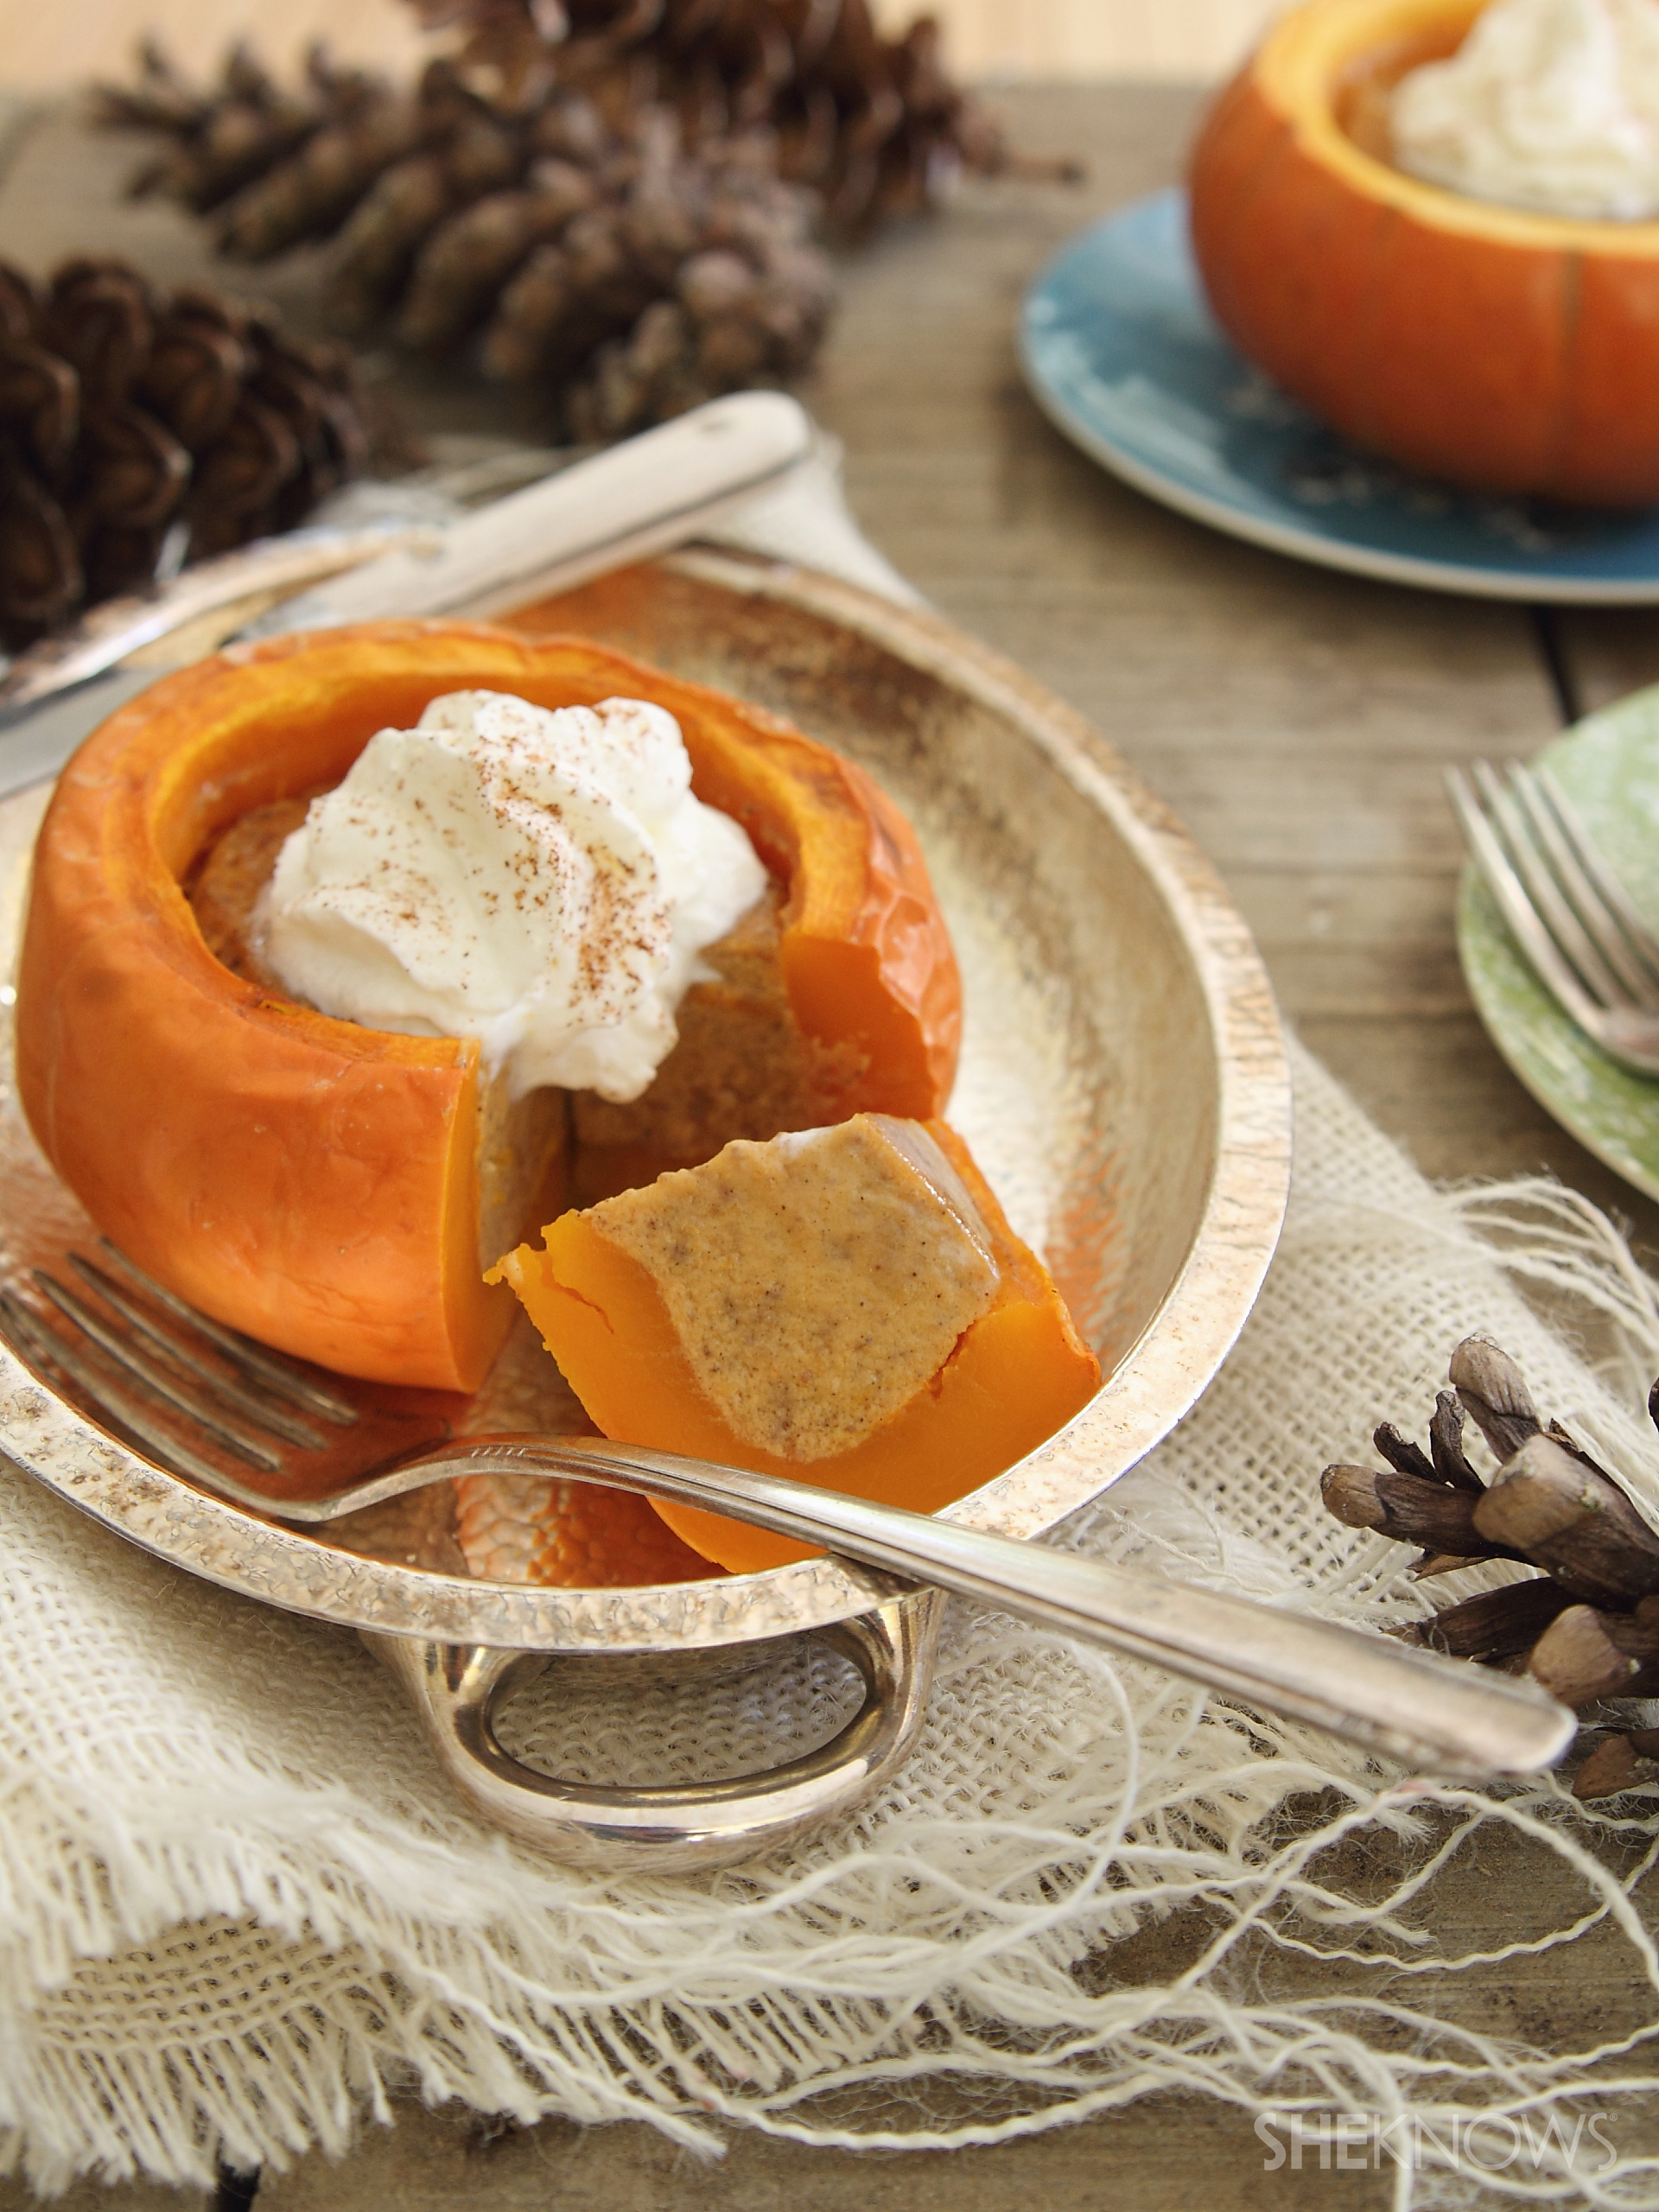 How To Prepare Pumpkin For Pie